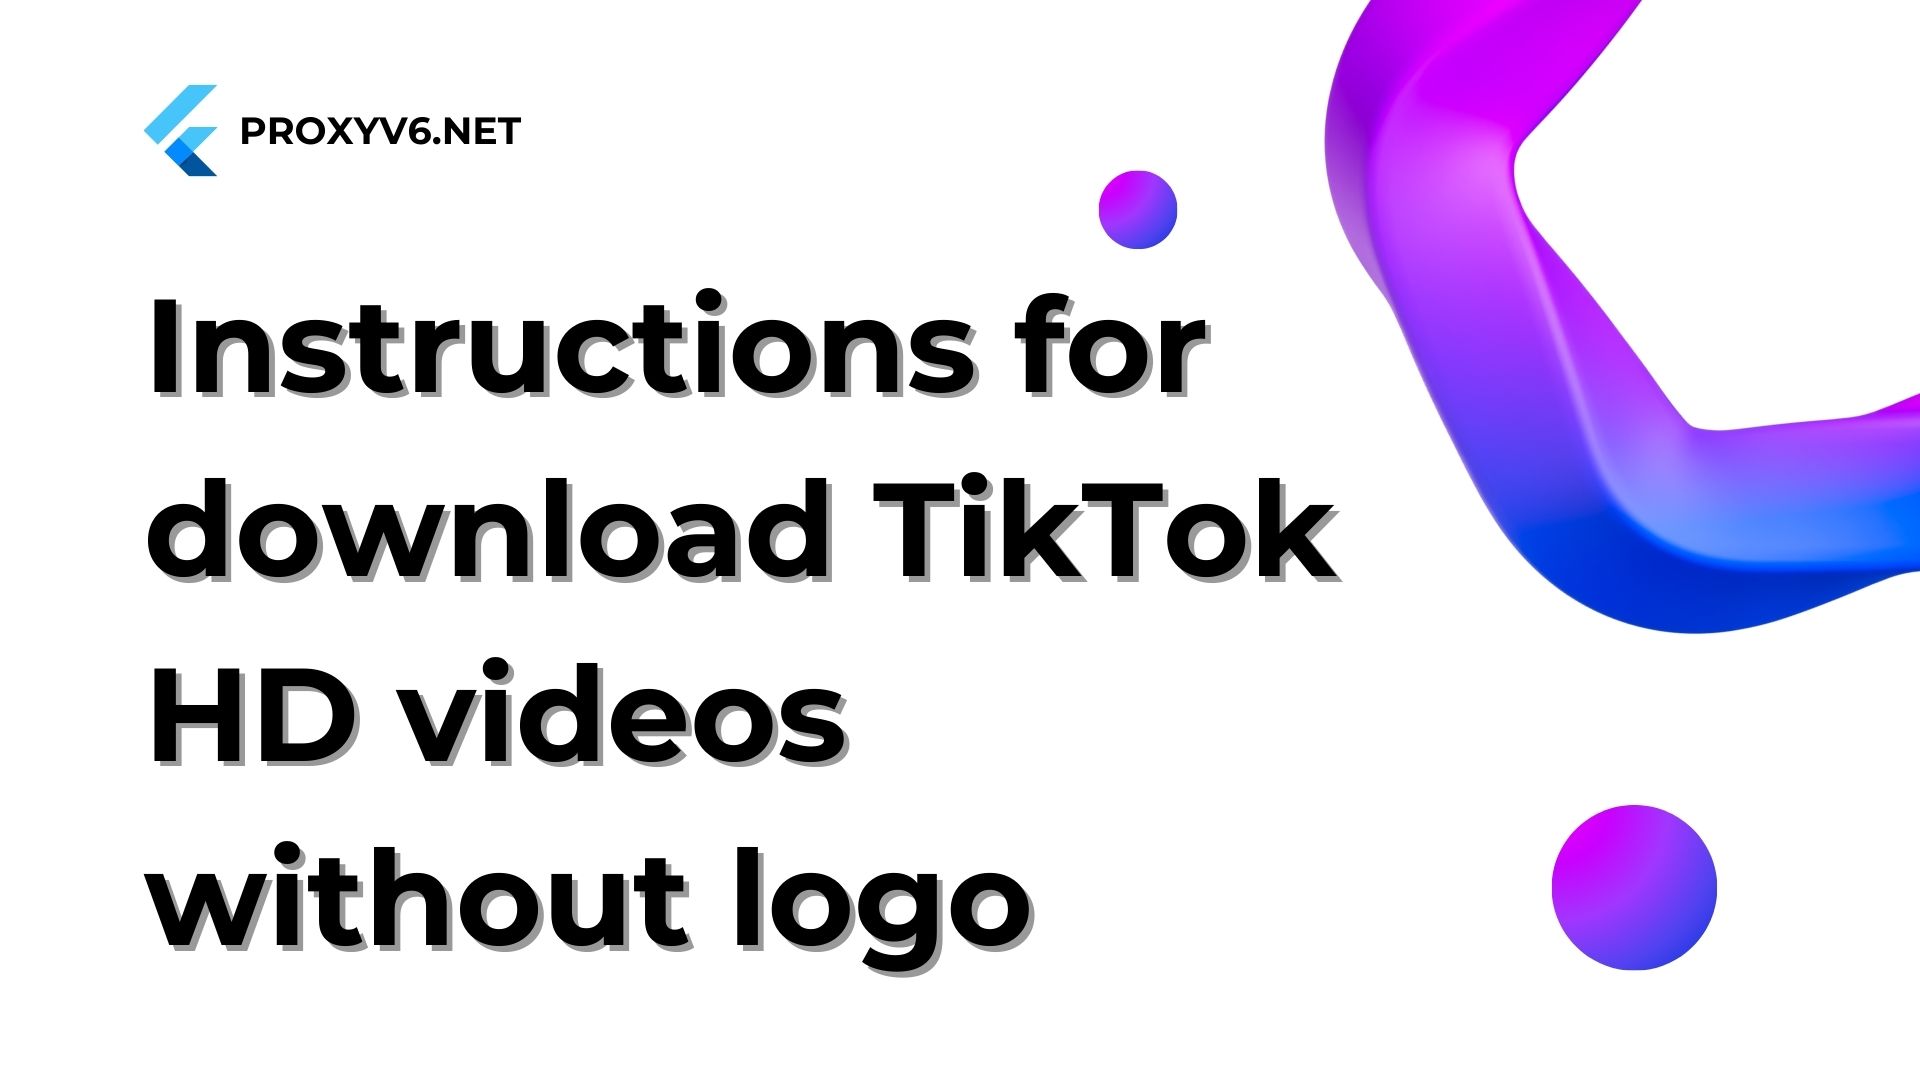 Instructions for download video TikTok HD without logo